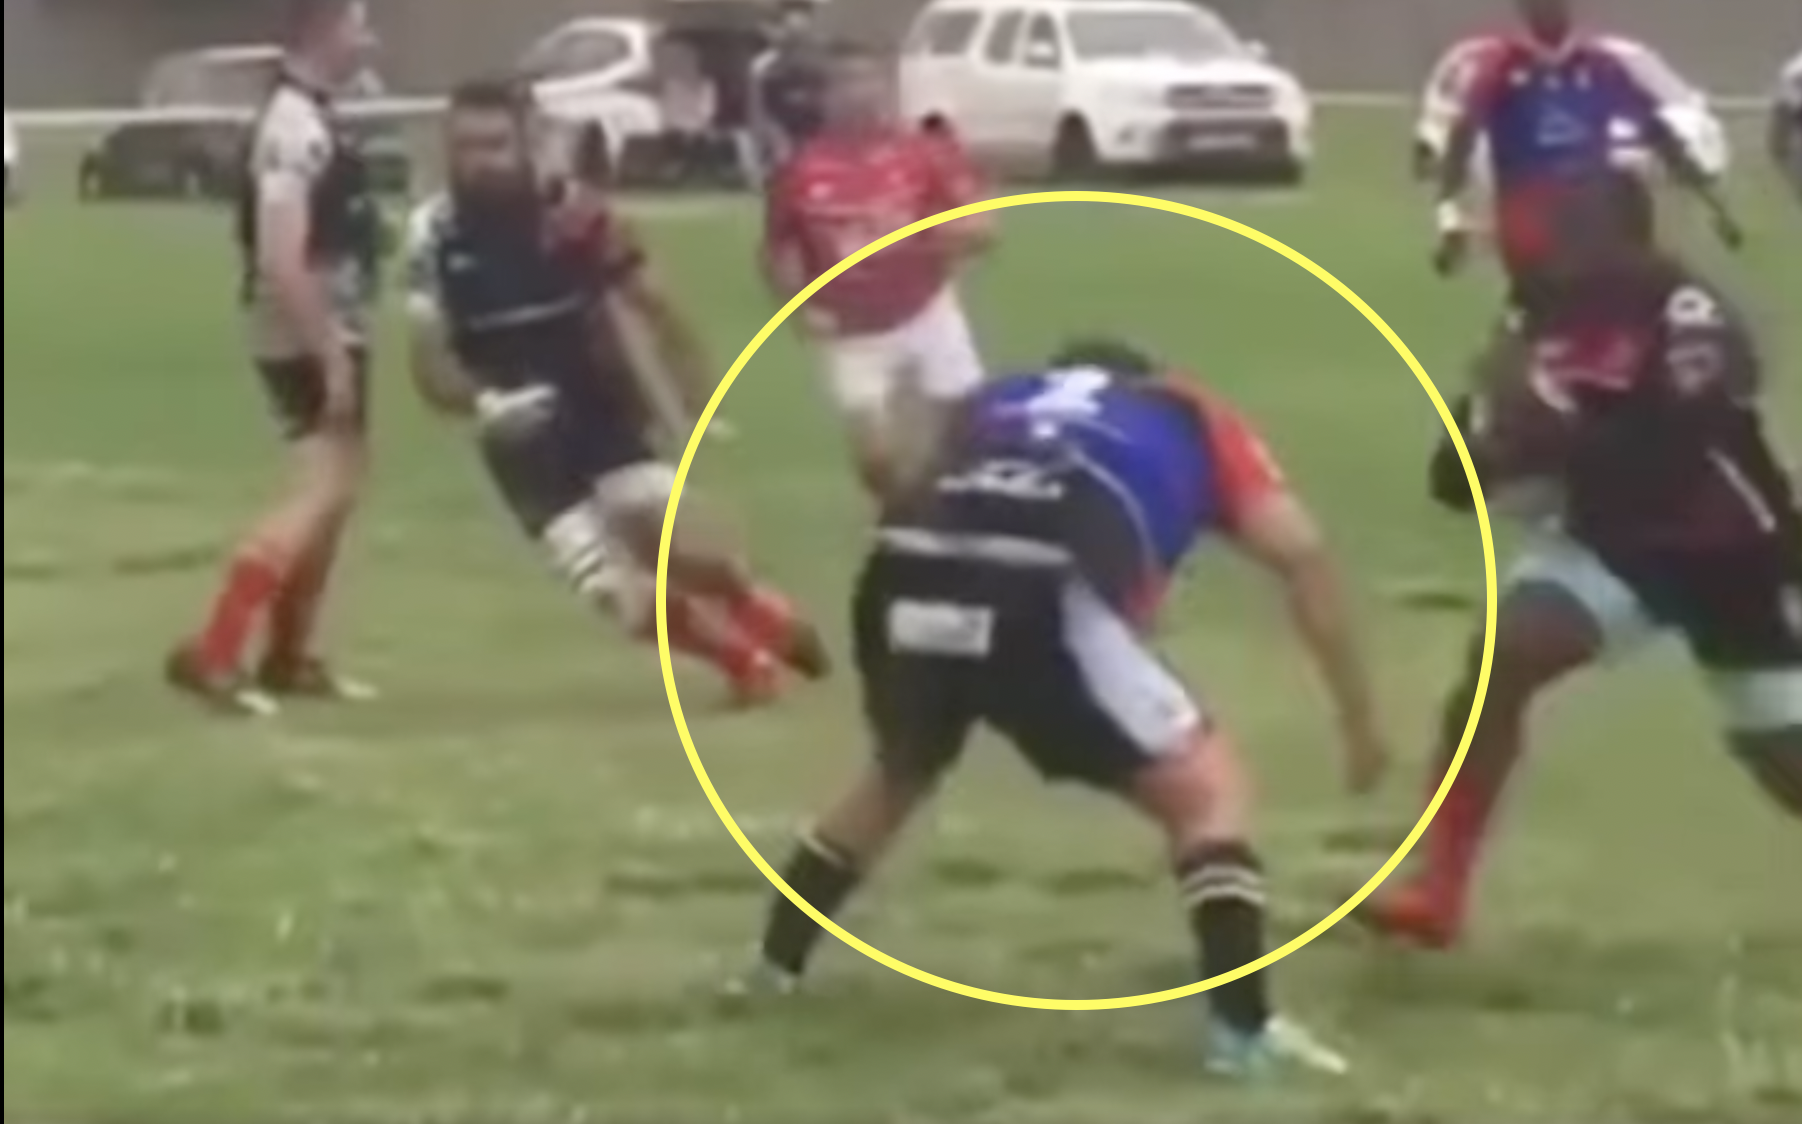 Hooker sent flying by player half his size